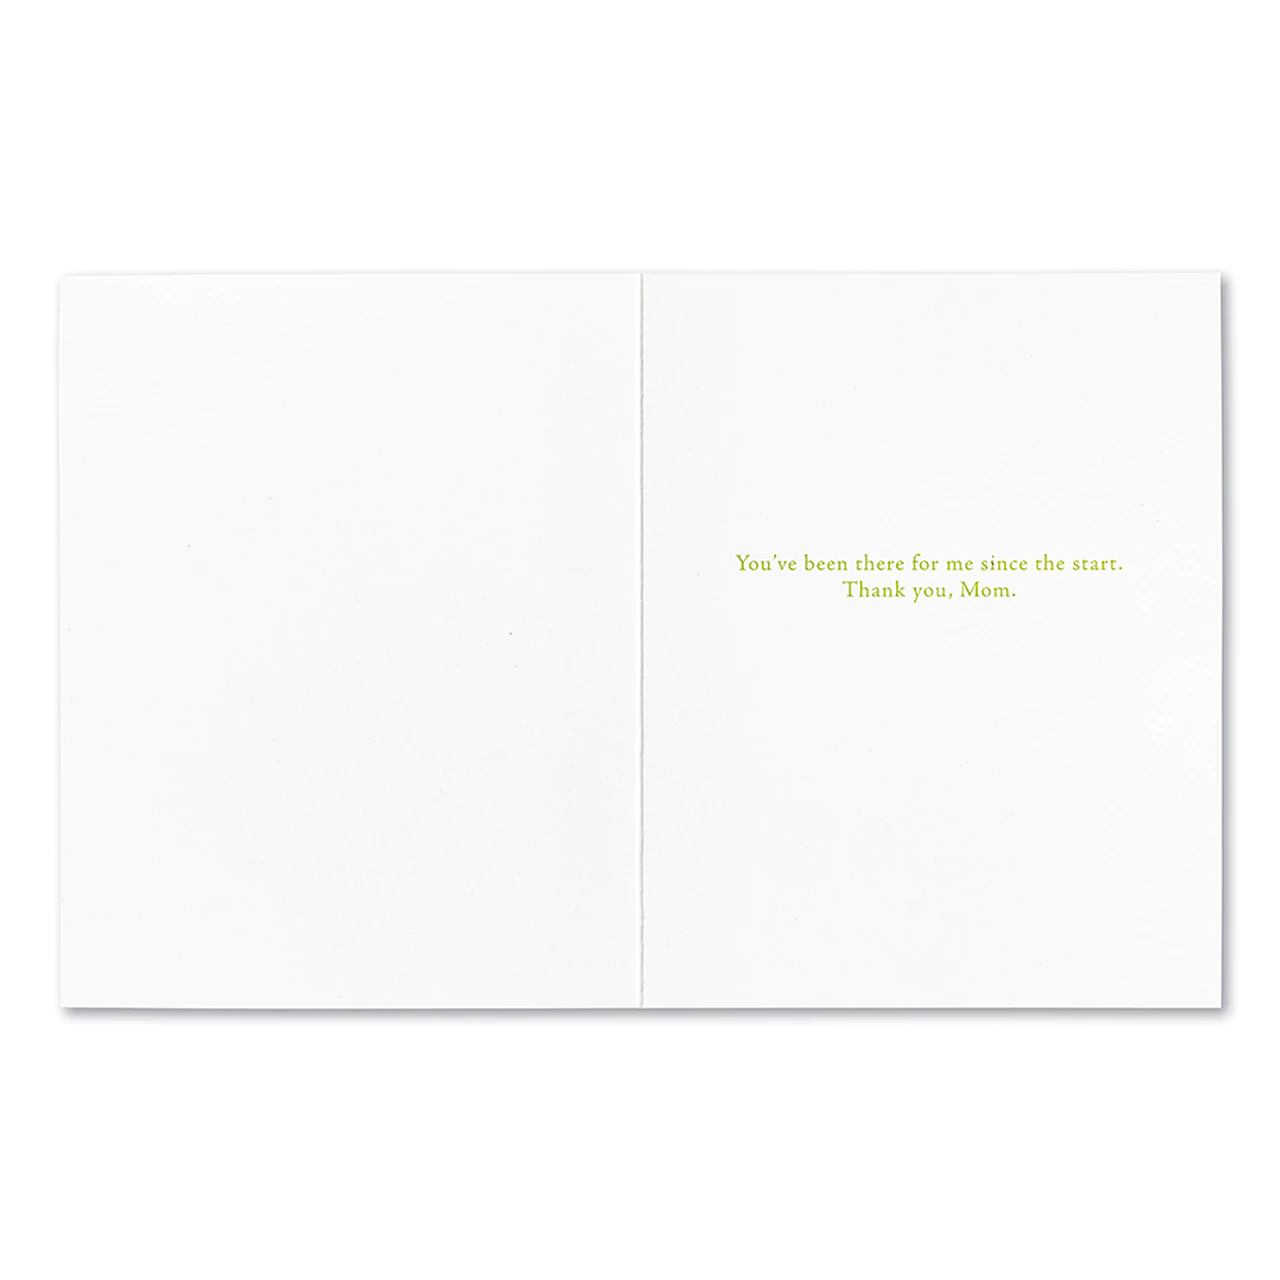 Positively Green Greeting Card- Mother's Day - "All Our Hopes and Dreams She Shares" -Julia Summers - Mellow Monkey